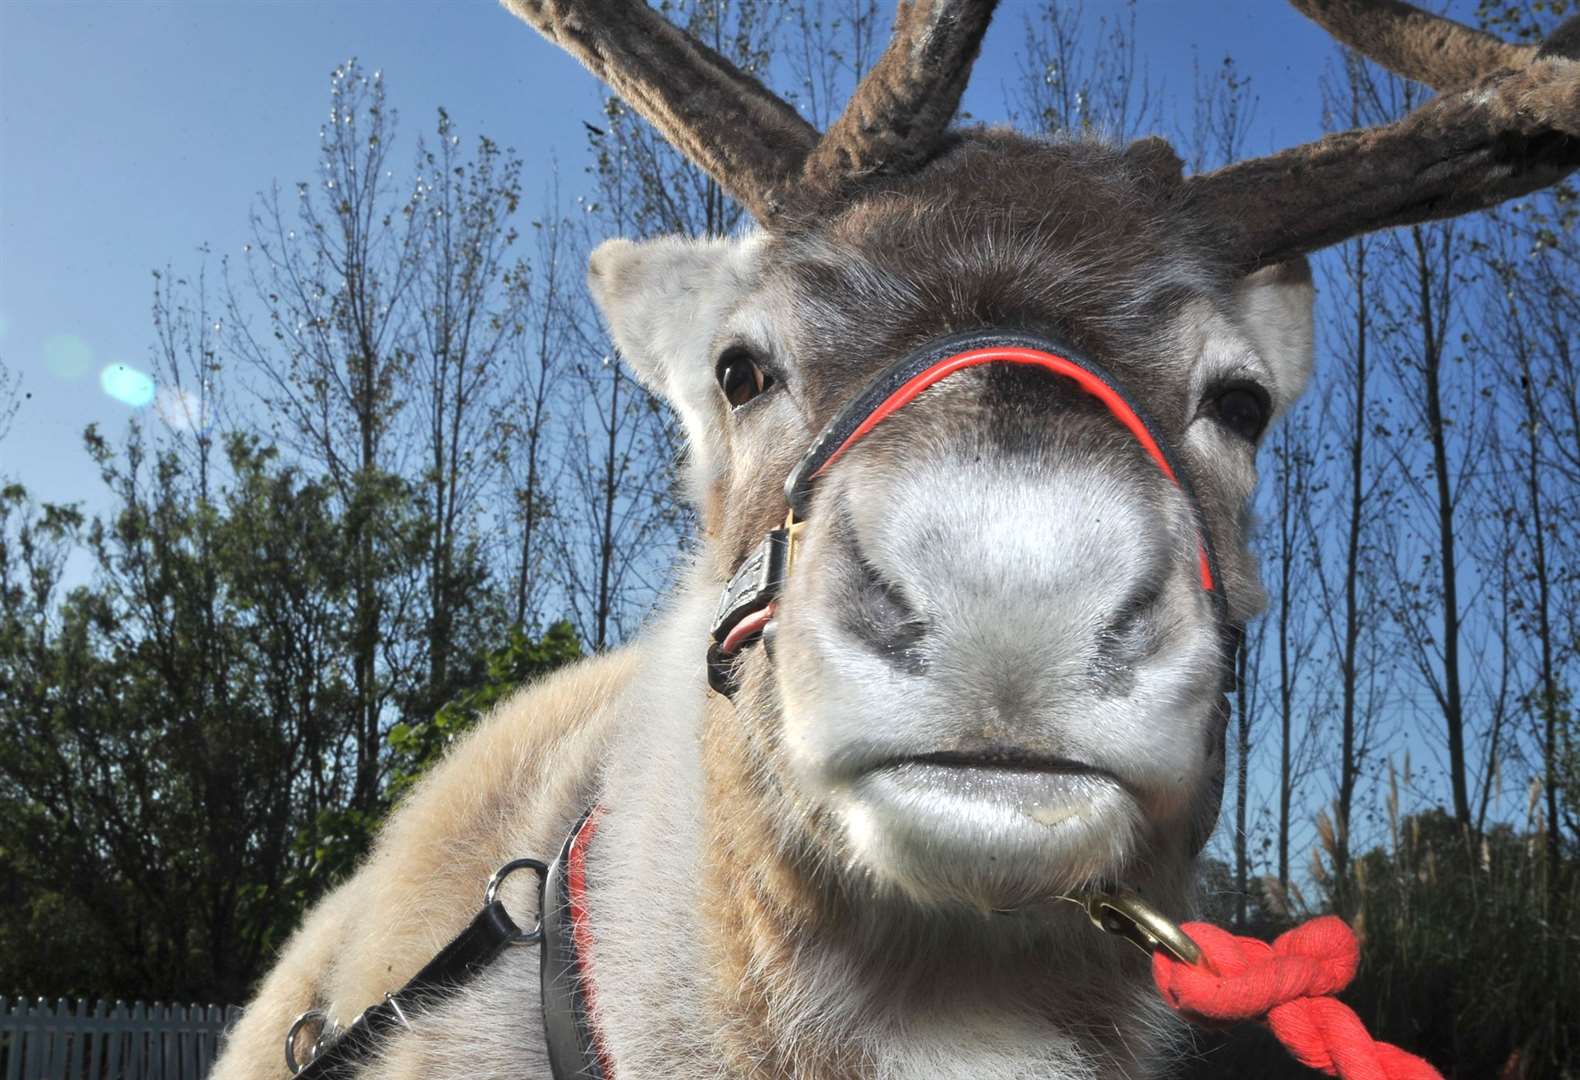 The Reindeer Centre has Christmas events